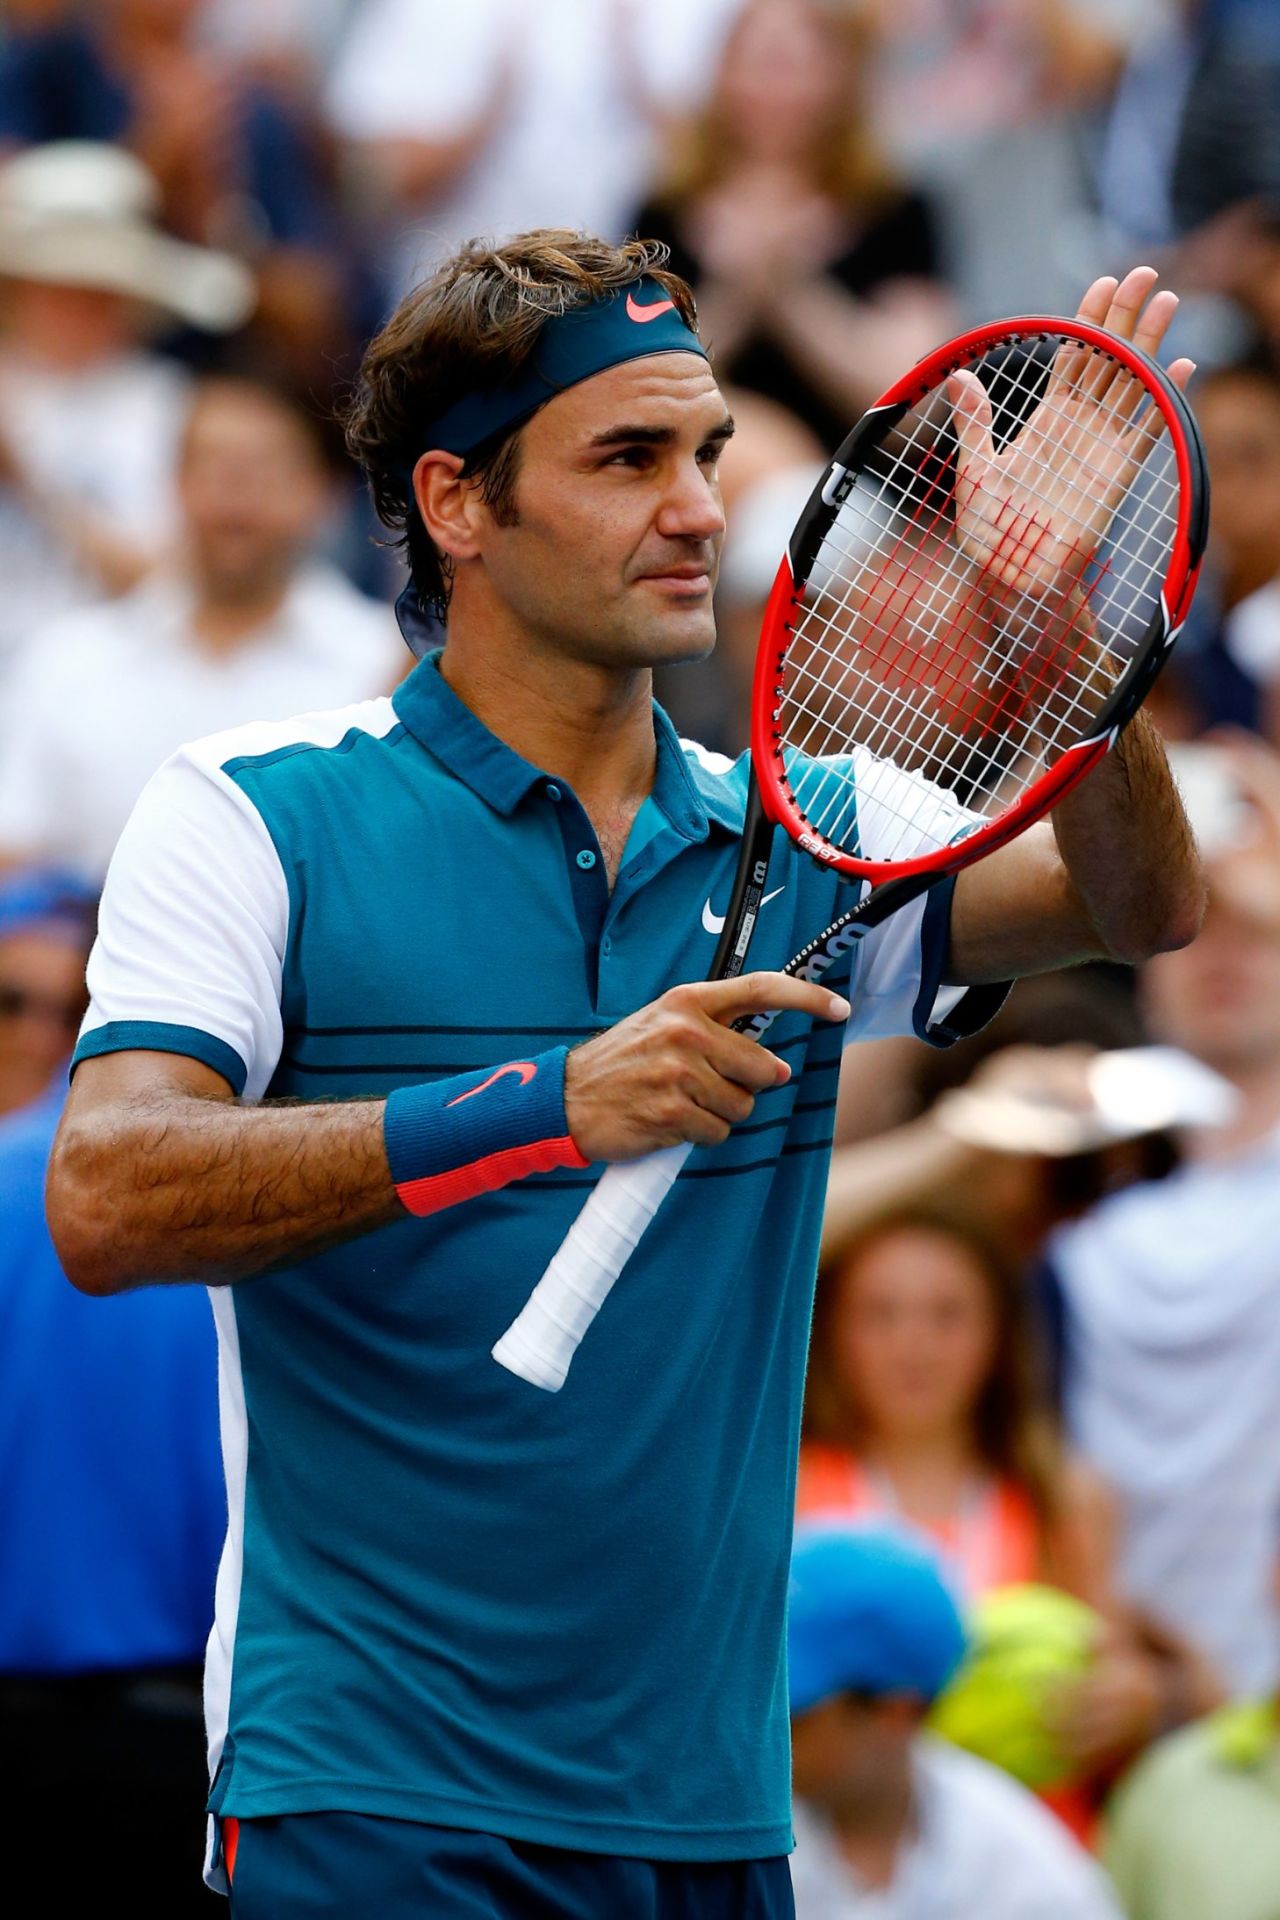 Federer, who has never lost in the first round in New York, won 84% of his first-serve points. 